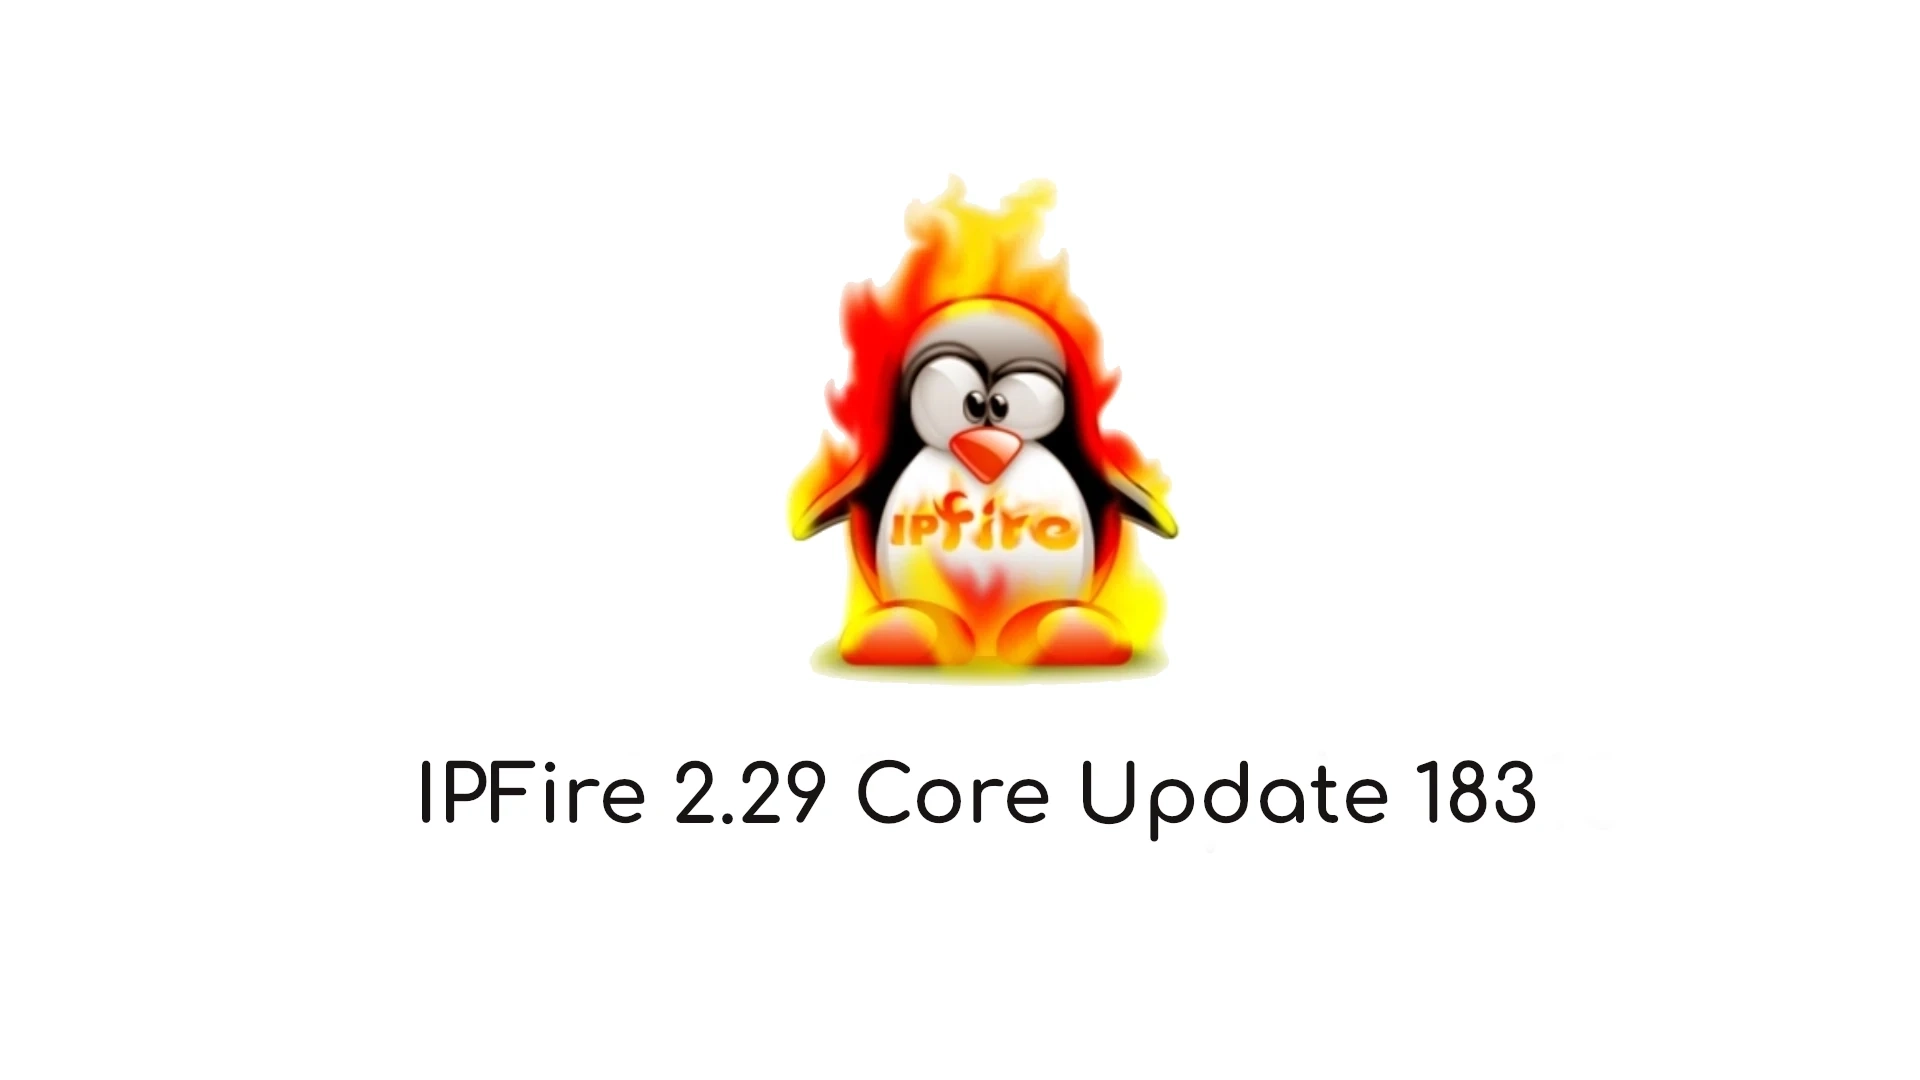 IPFire Hardened Linux Firewall Now Runs on Linux Kernel 6.6 LTS